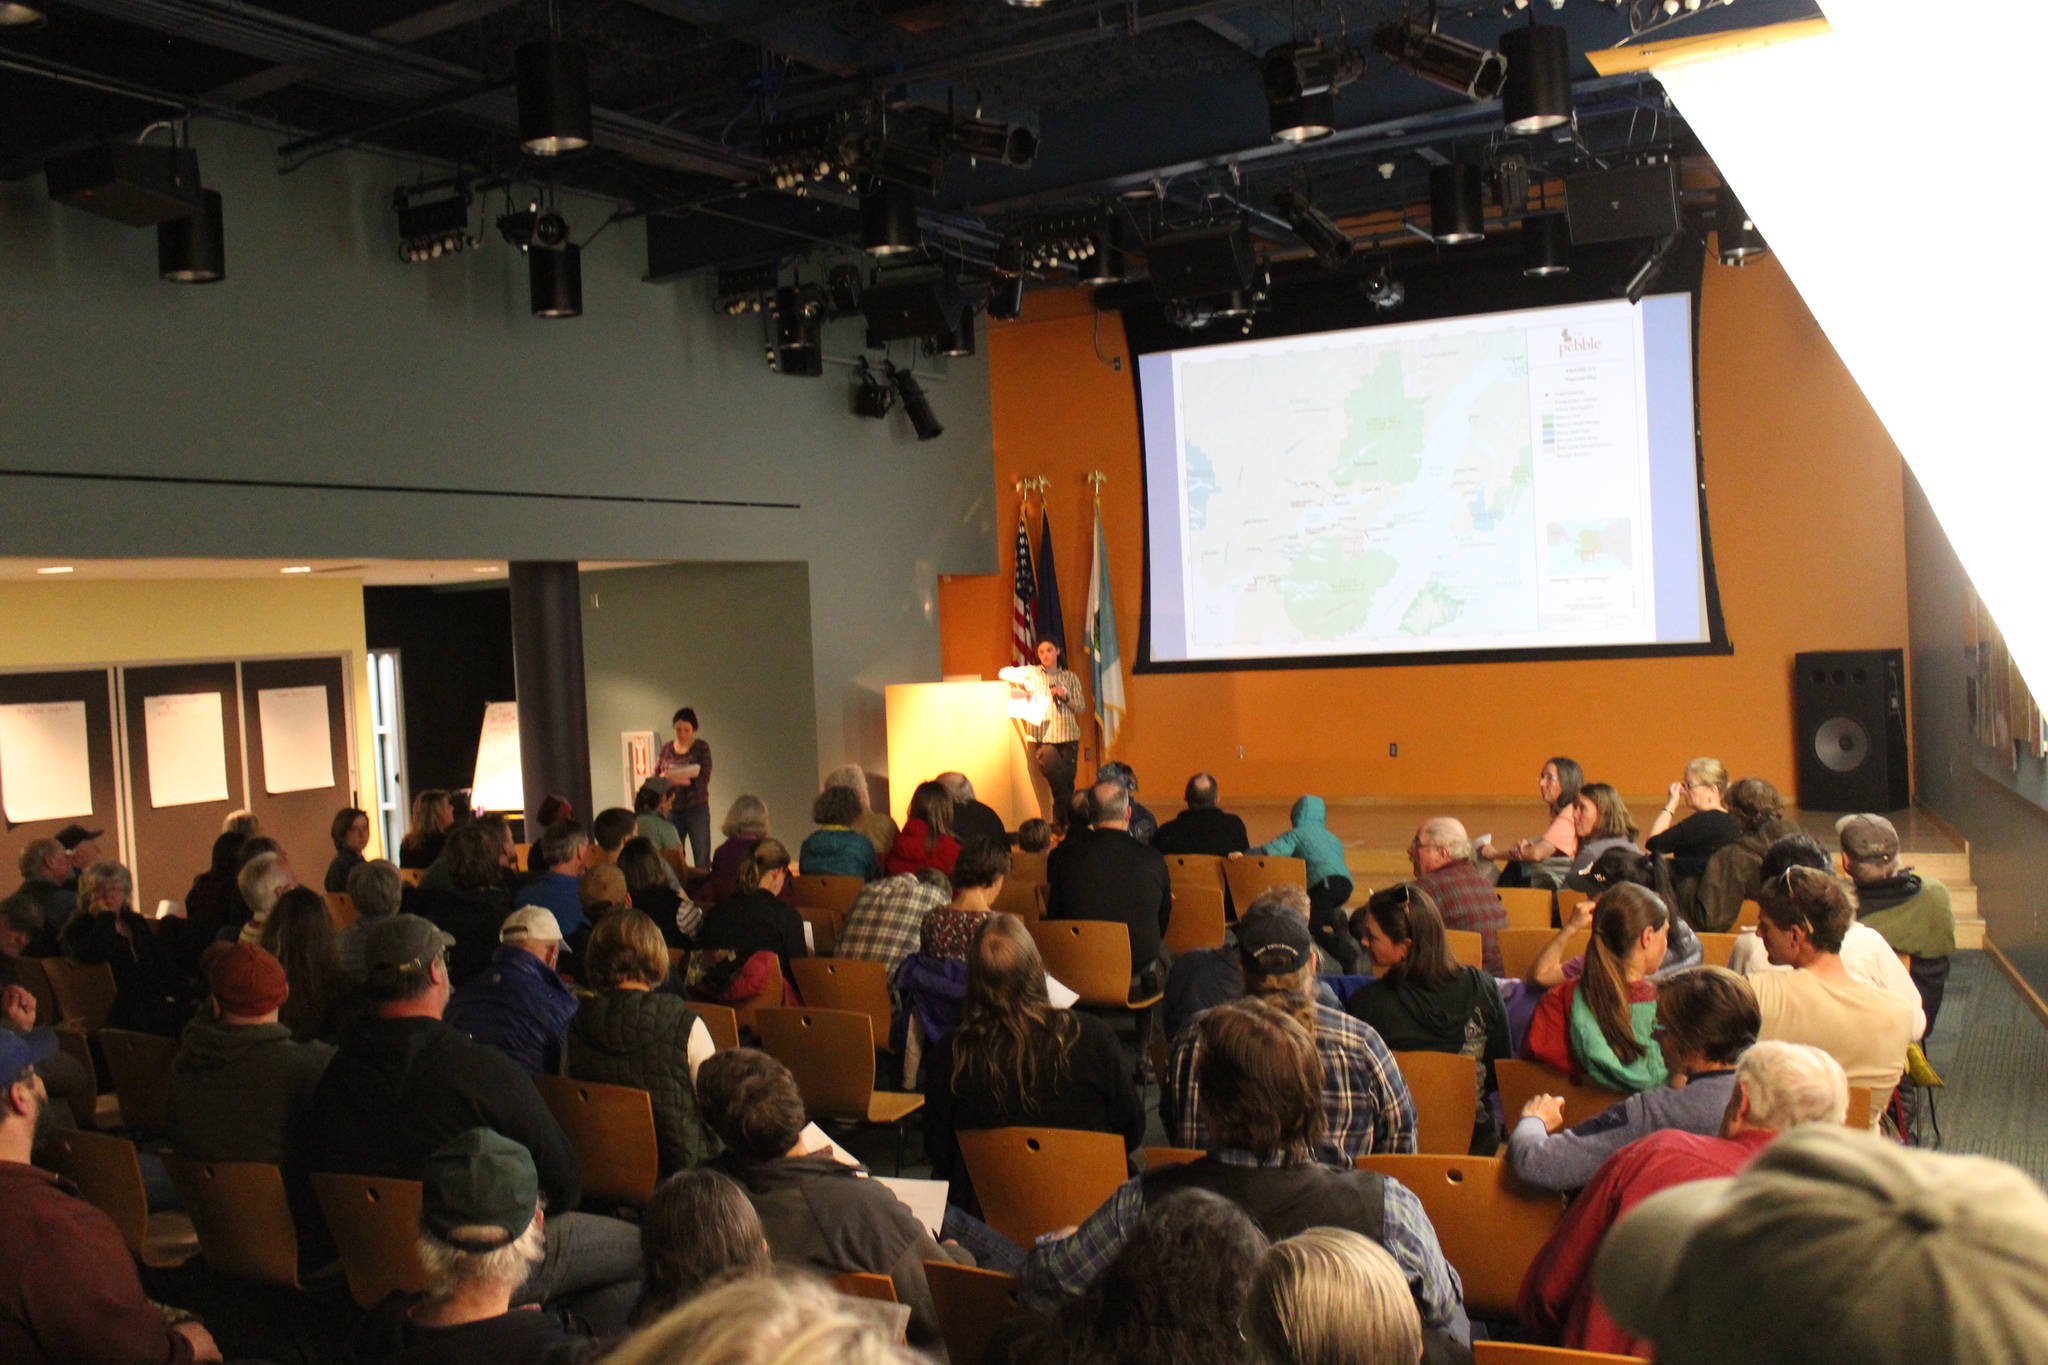 An update on the Pebble mine project presented by Cook Inletkeeper on Friday and a plea for the public’s involvement drew a crowd that filled Alaska Islands and Ocean Visitor Center’s auditorium. Those arriving late found themselves unable to get in. (Photo by McKibben Jackinsky)